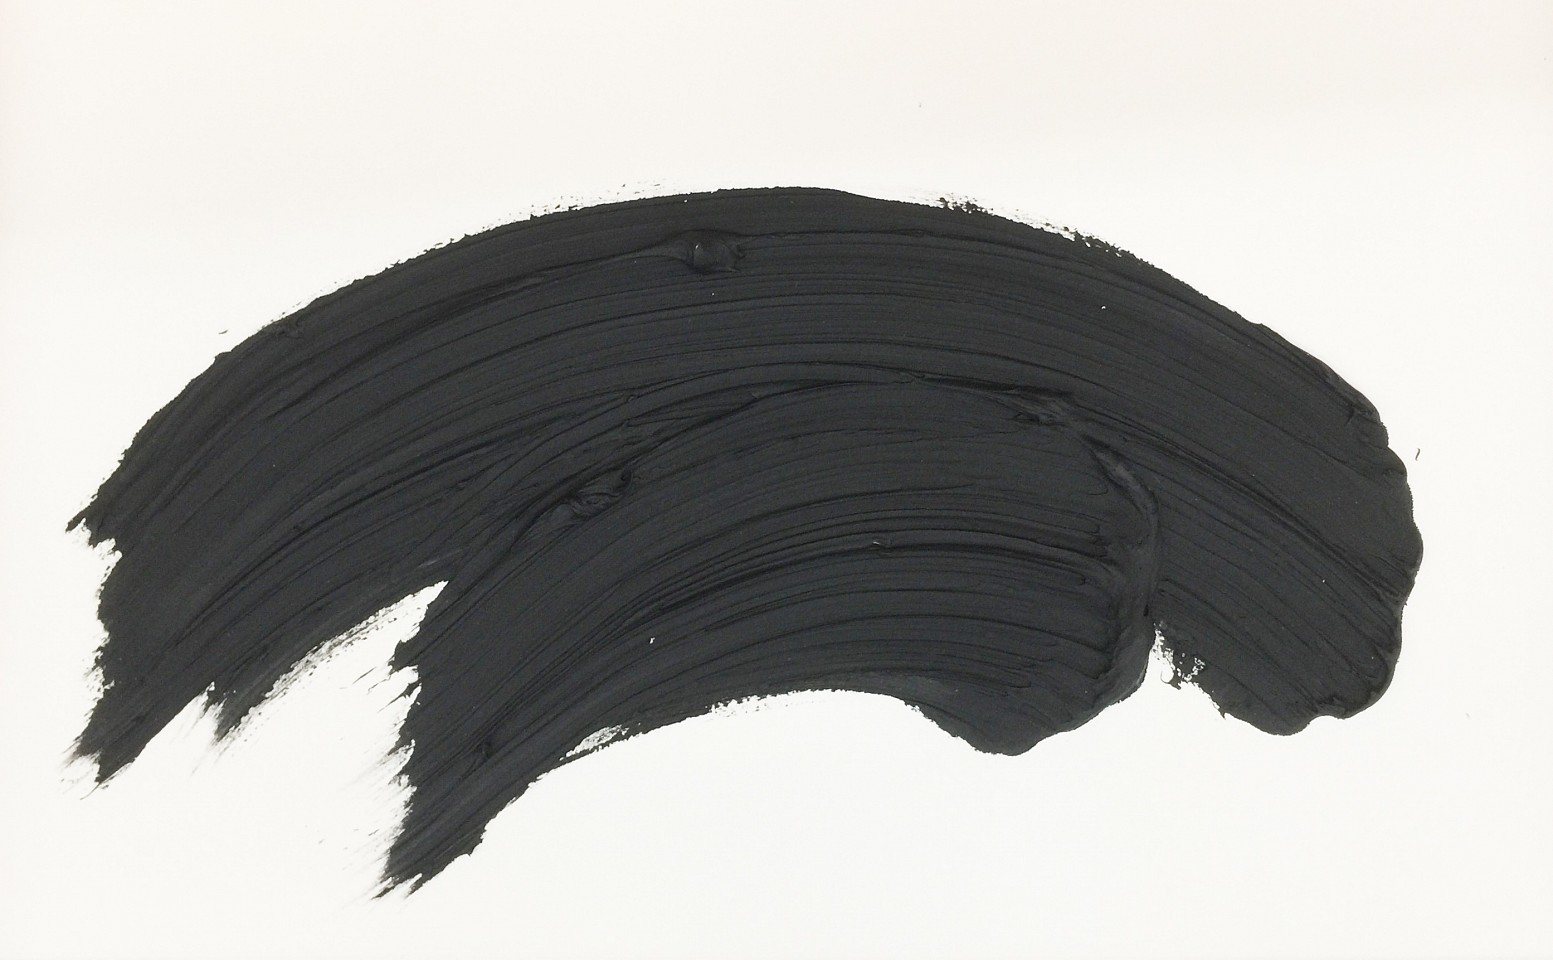 Donald Martiny, Untitled, 2017
polymer and pigment on paper
black
MART0034